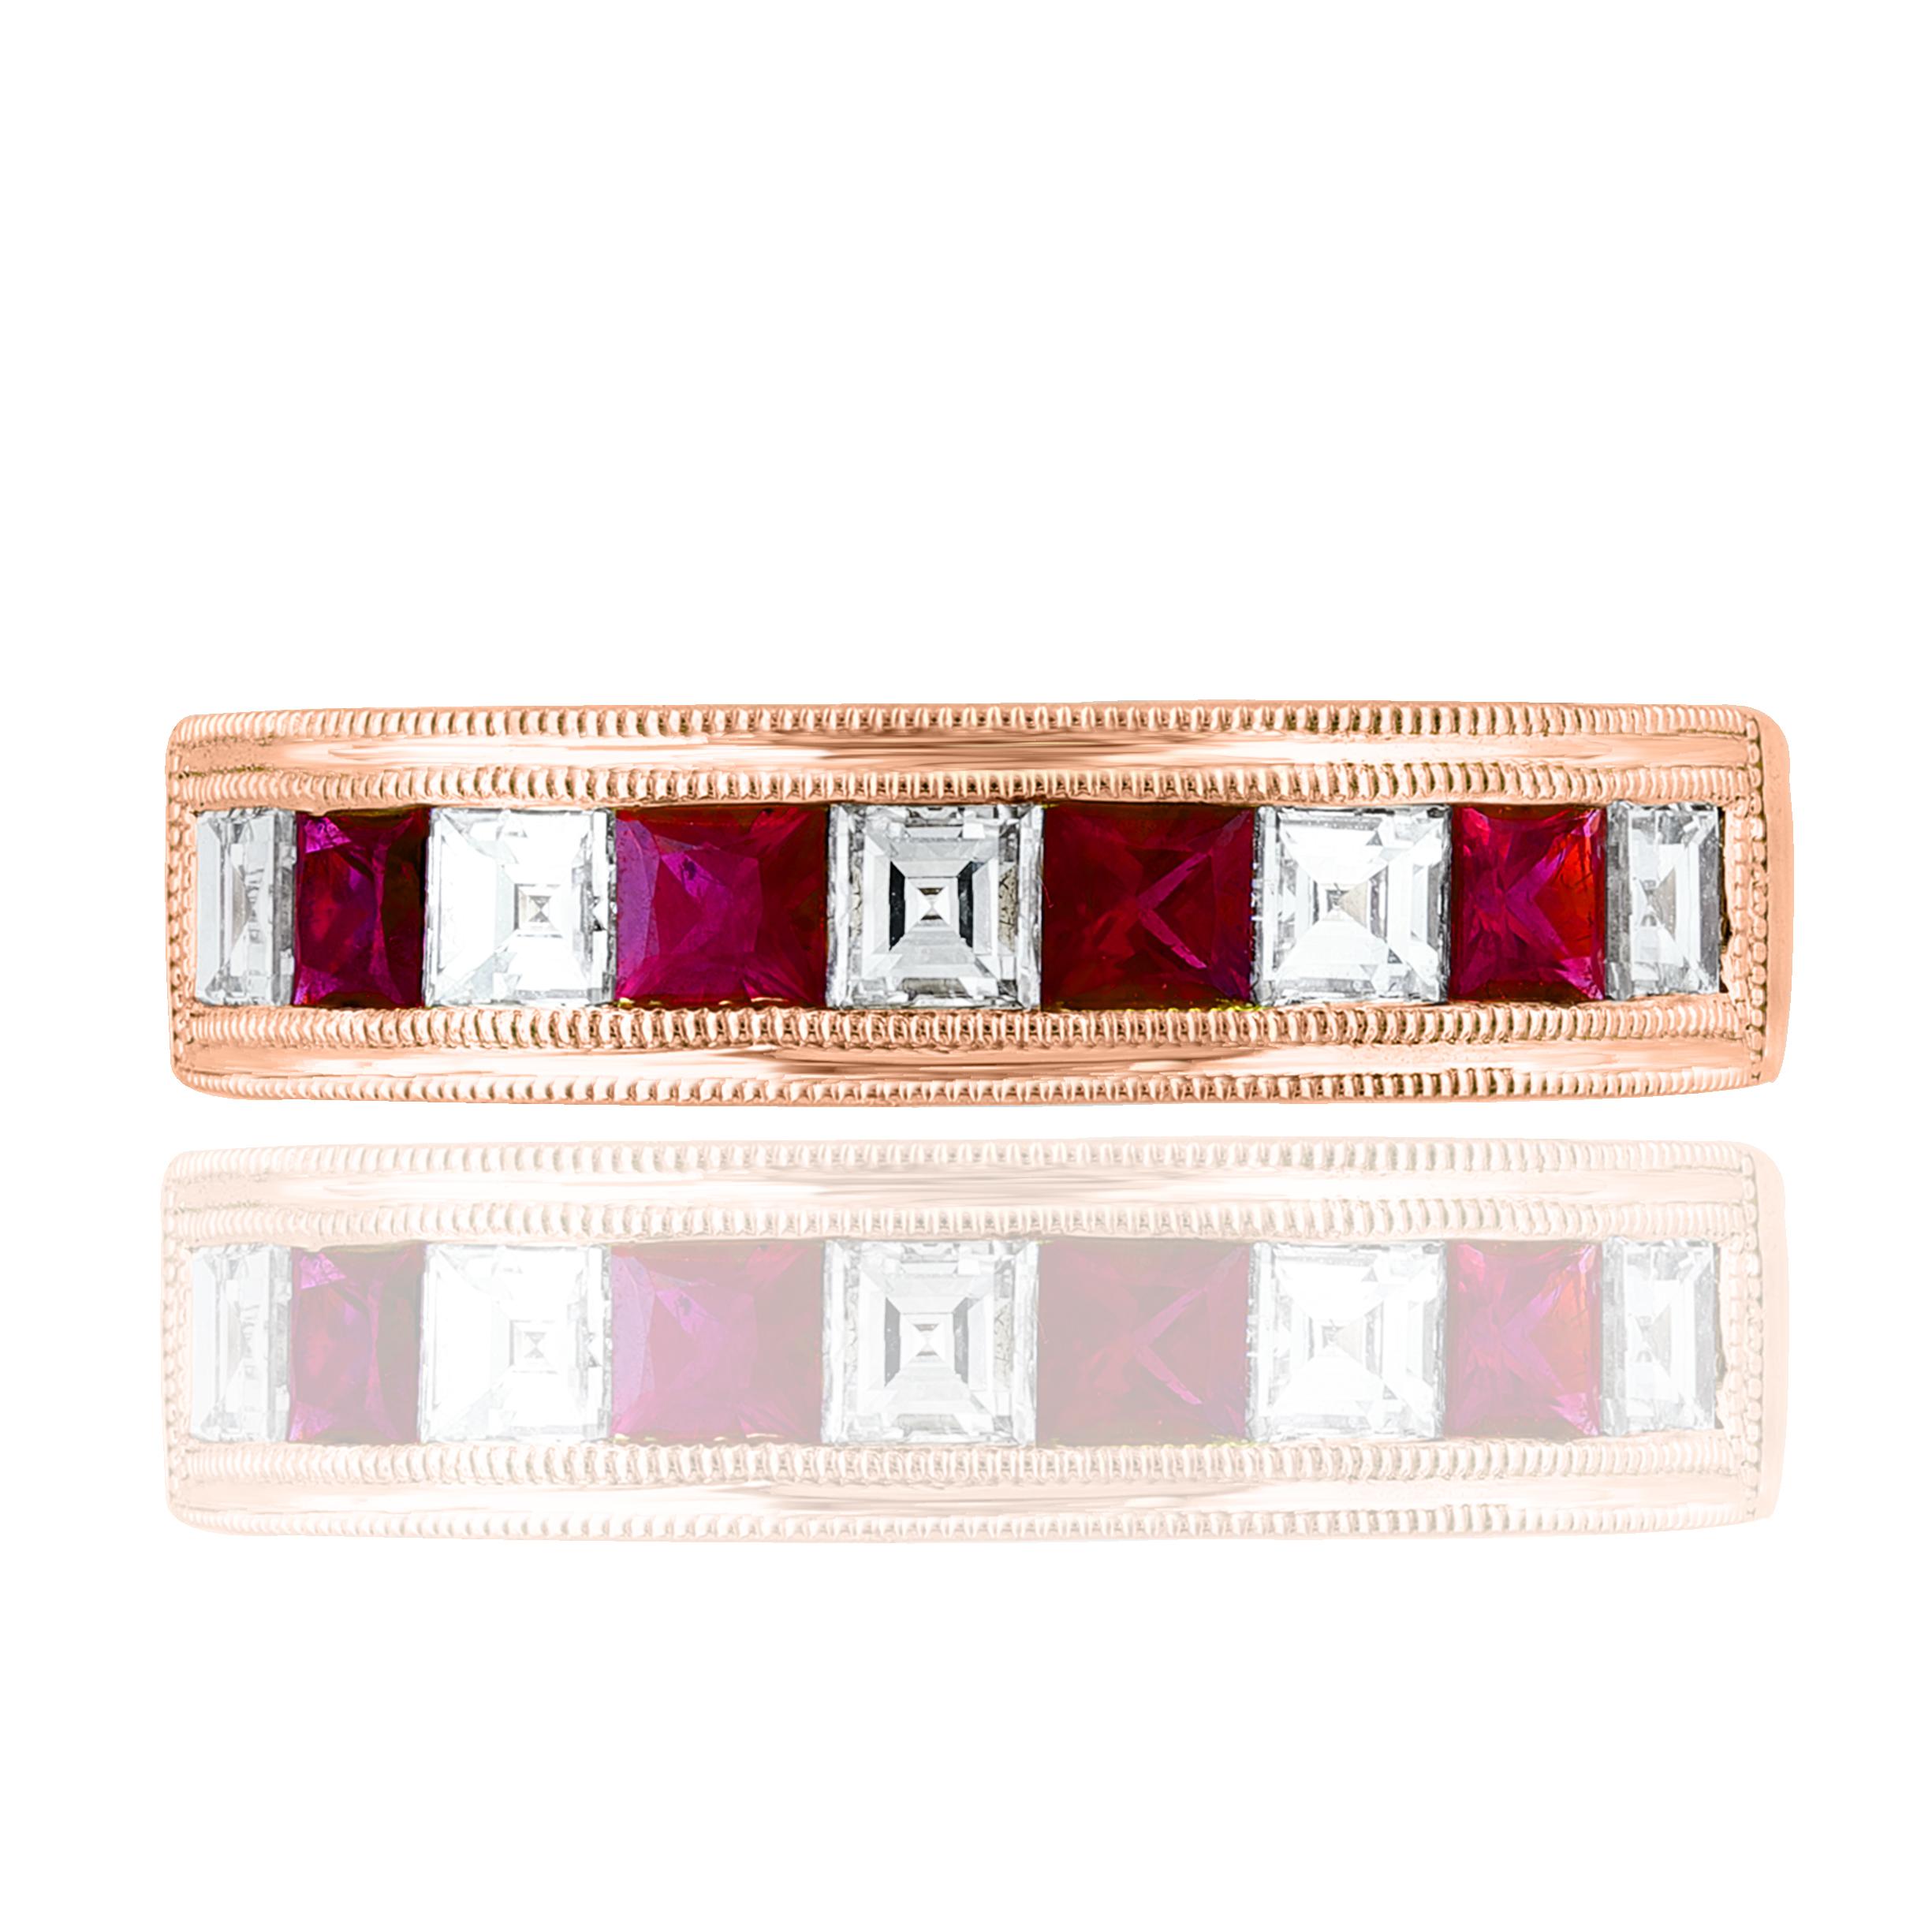 Handcrafted to perfection; showcasing color-rich princess-cut red rubies that elegantly alternate princess-cut diamonds in an 18k rose gold setting. 
The 4 Rubies weigh 0.57 carats total and 5 diamonds weigh 0.68 carats total.

Size 6.5 US